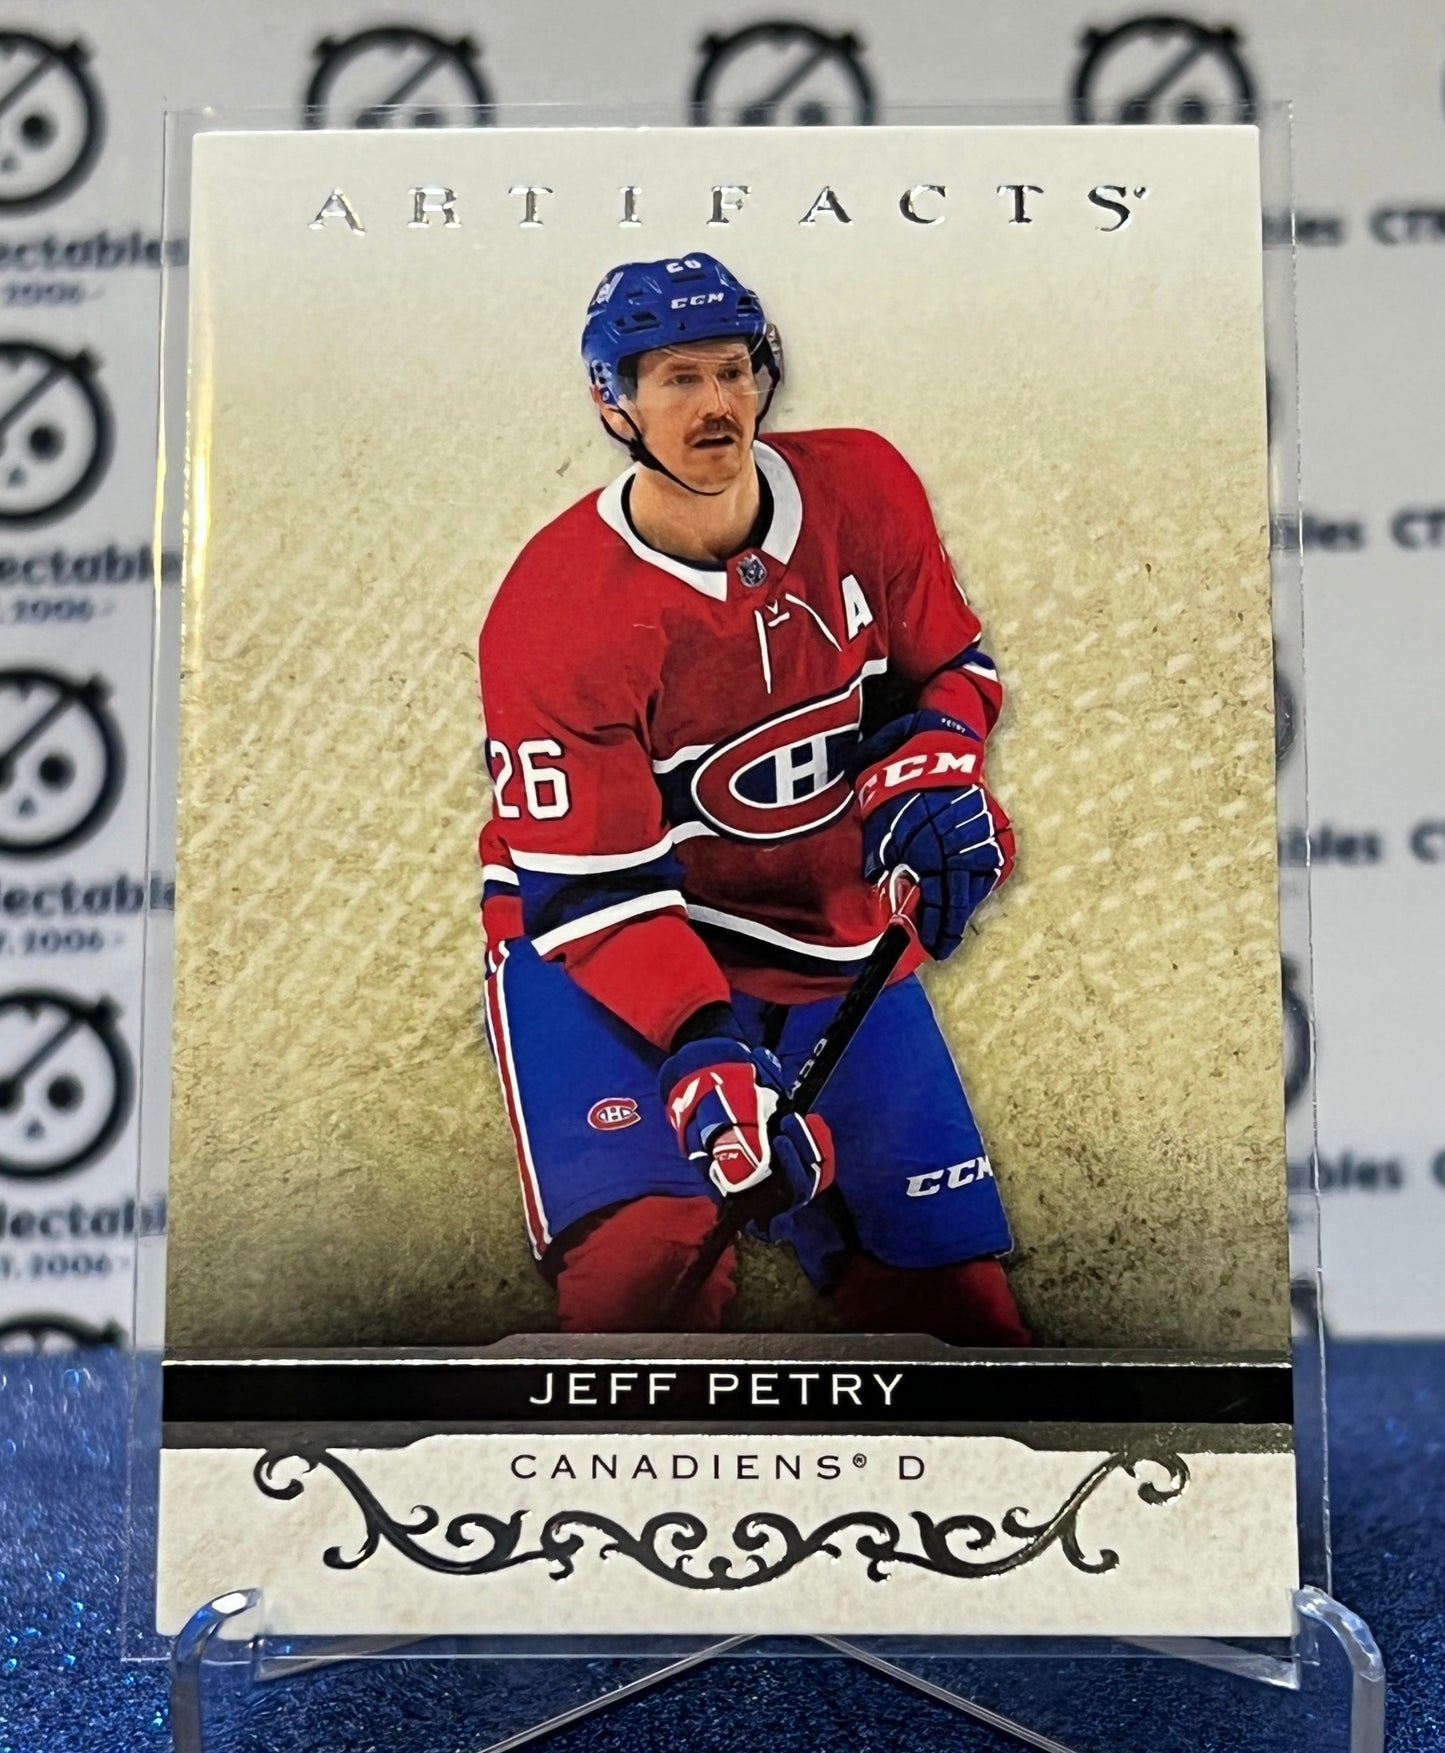 2021-22 UPPER DECK ARTIFACTS JEFF PETRY # 52 MONTREAL CANADIENS HOCKEY CARD